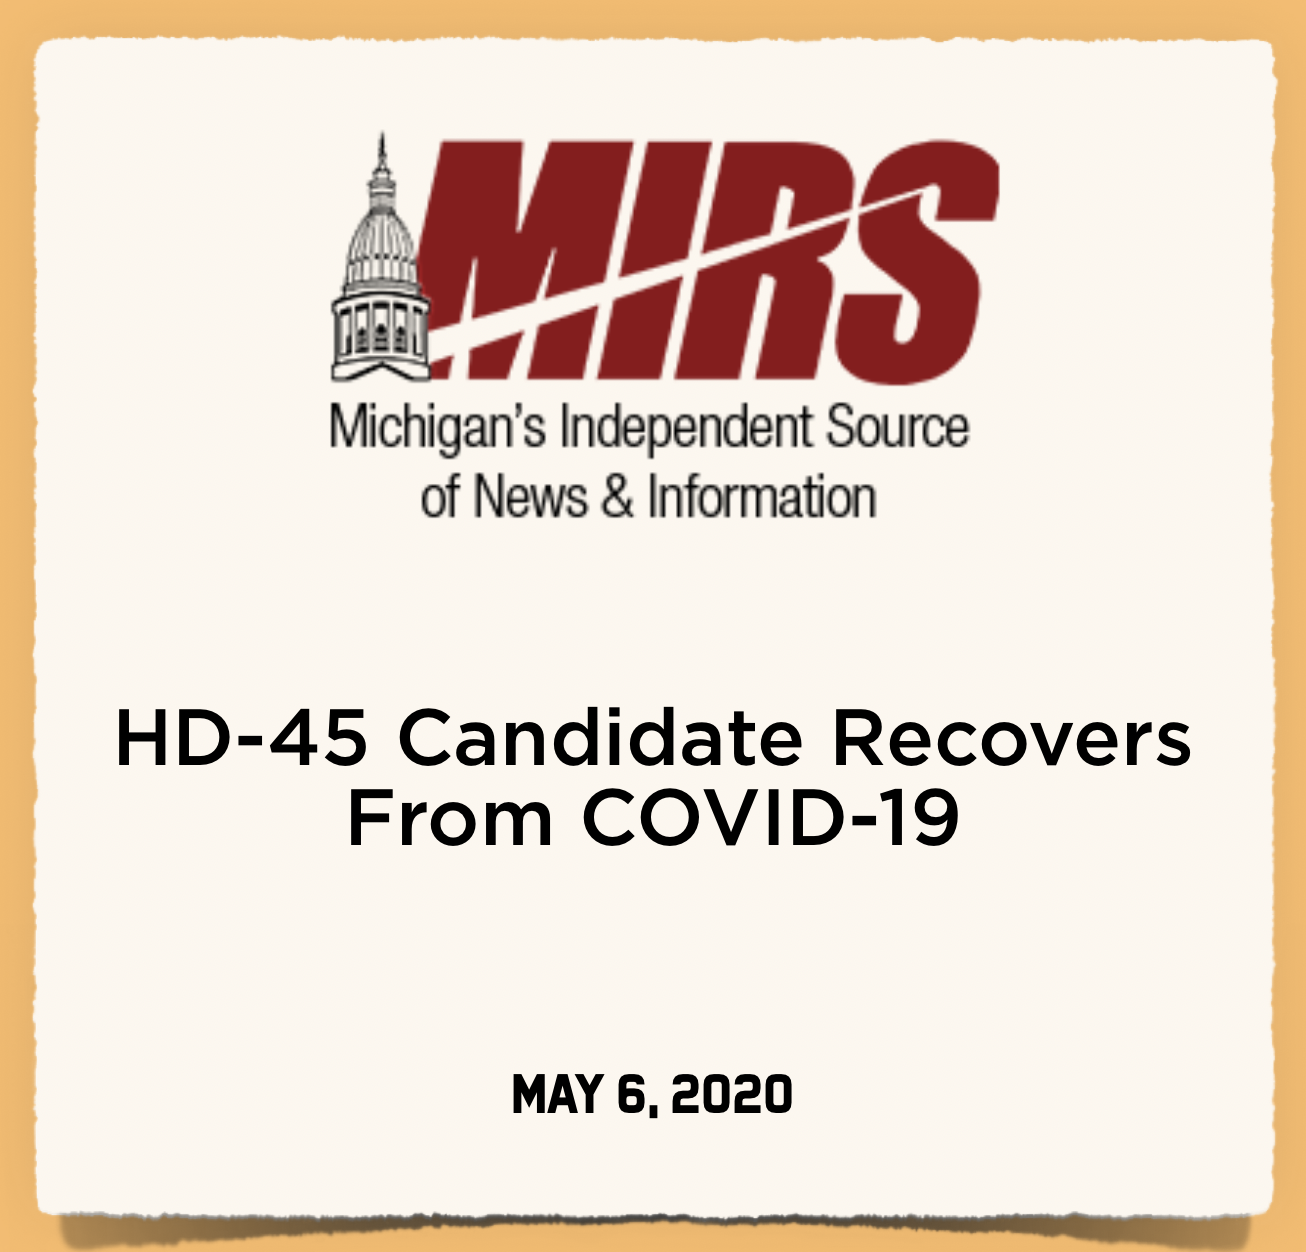 MIRS News: HD-45 Candidate Recovers From COVID-19